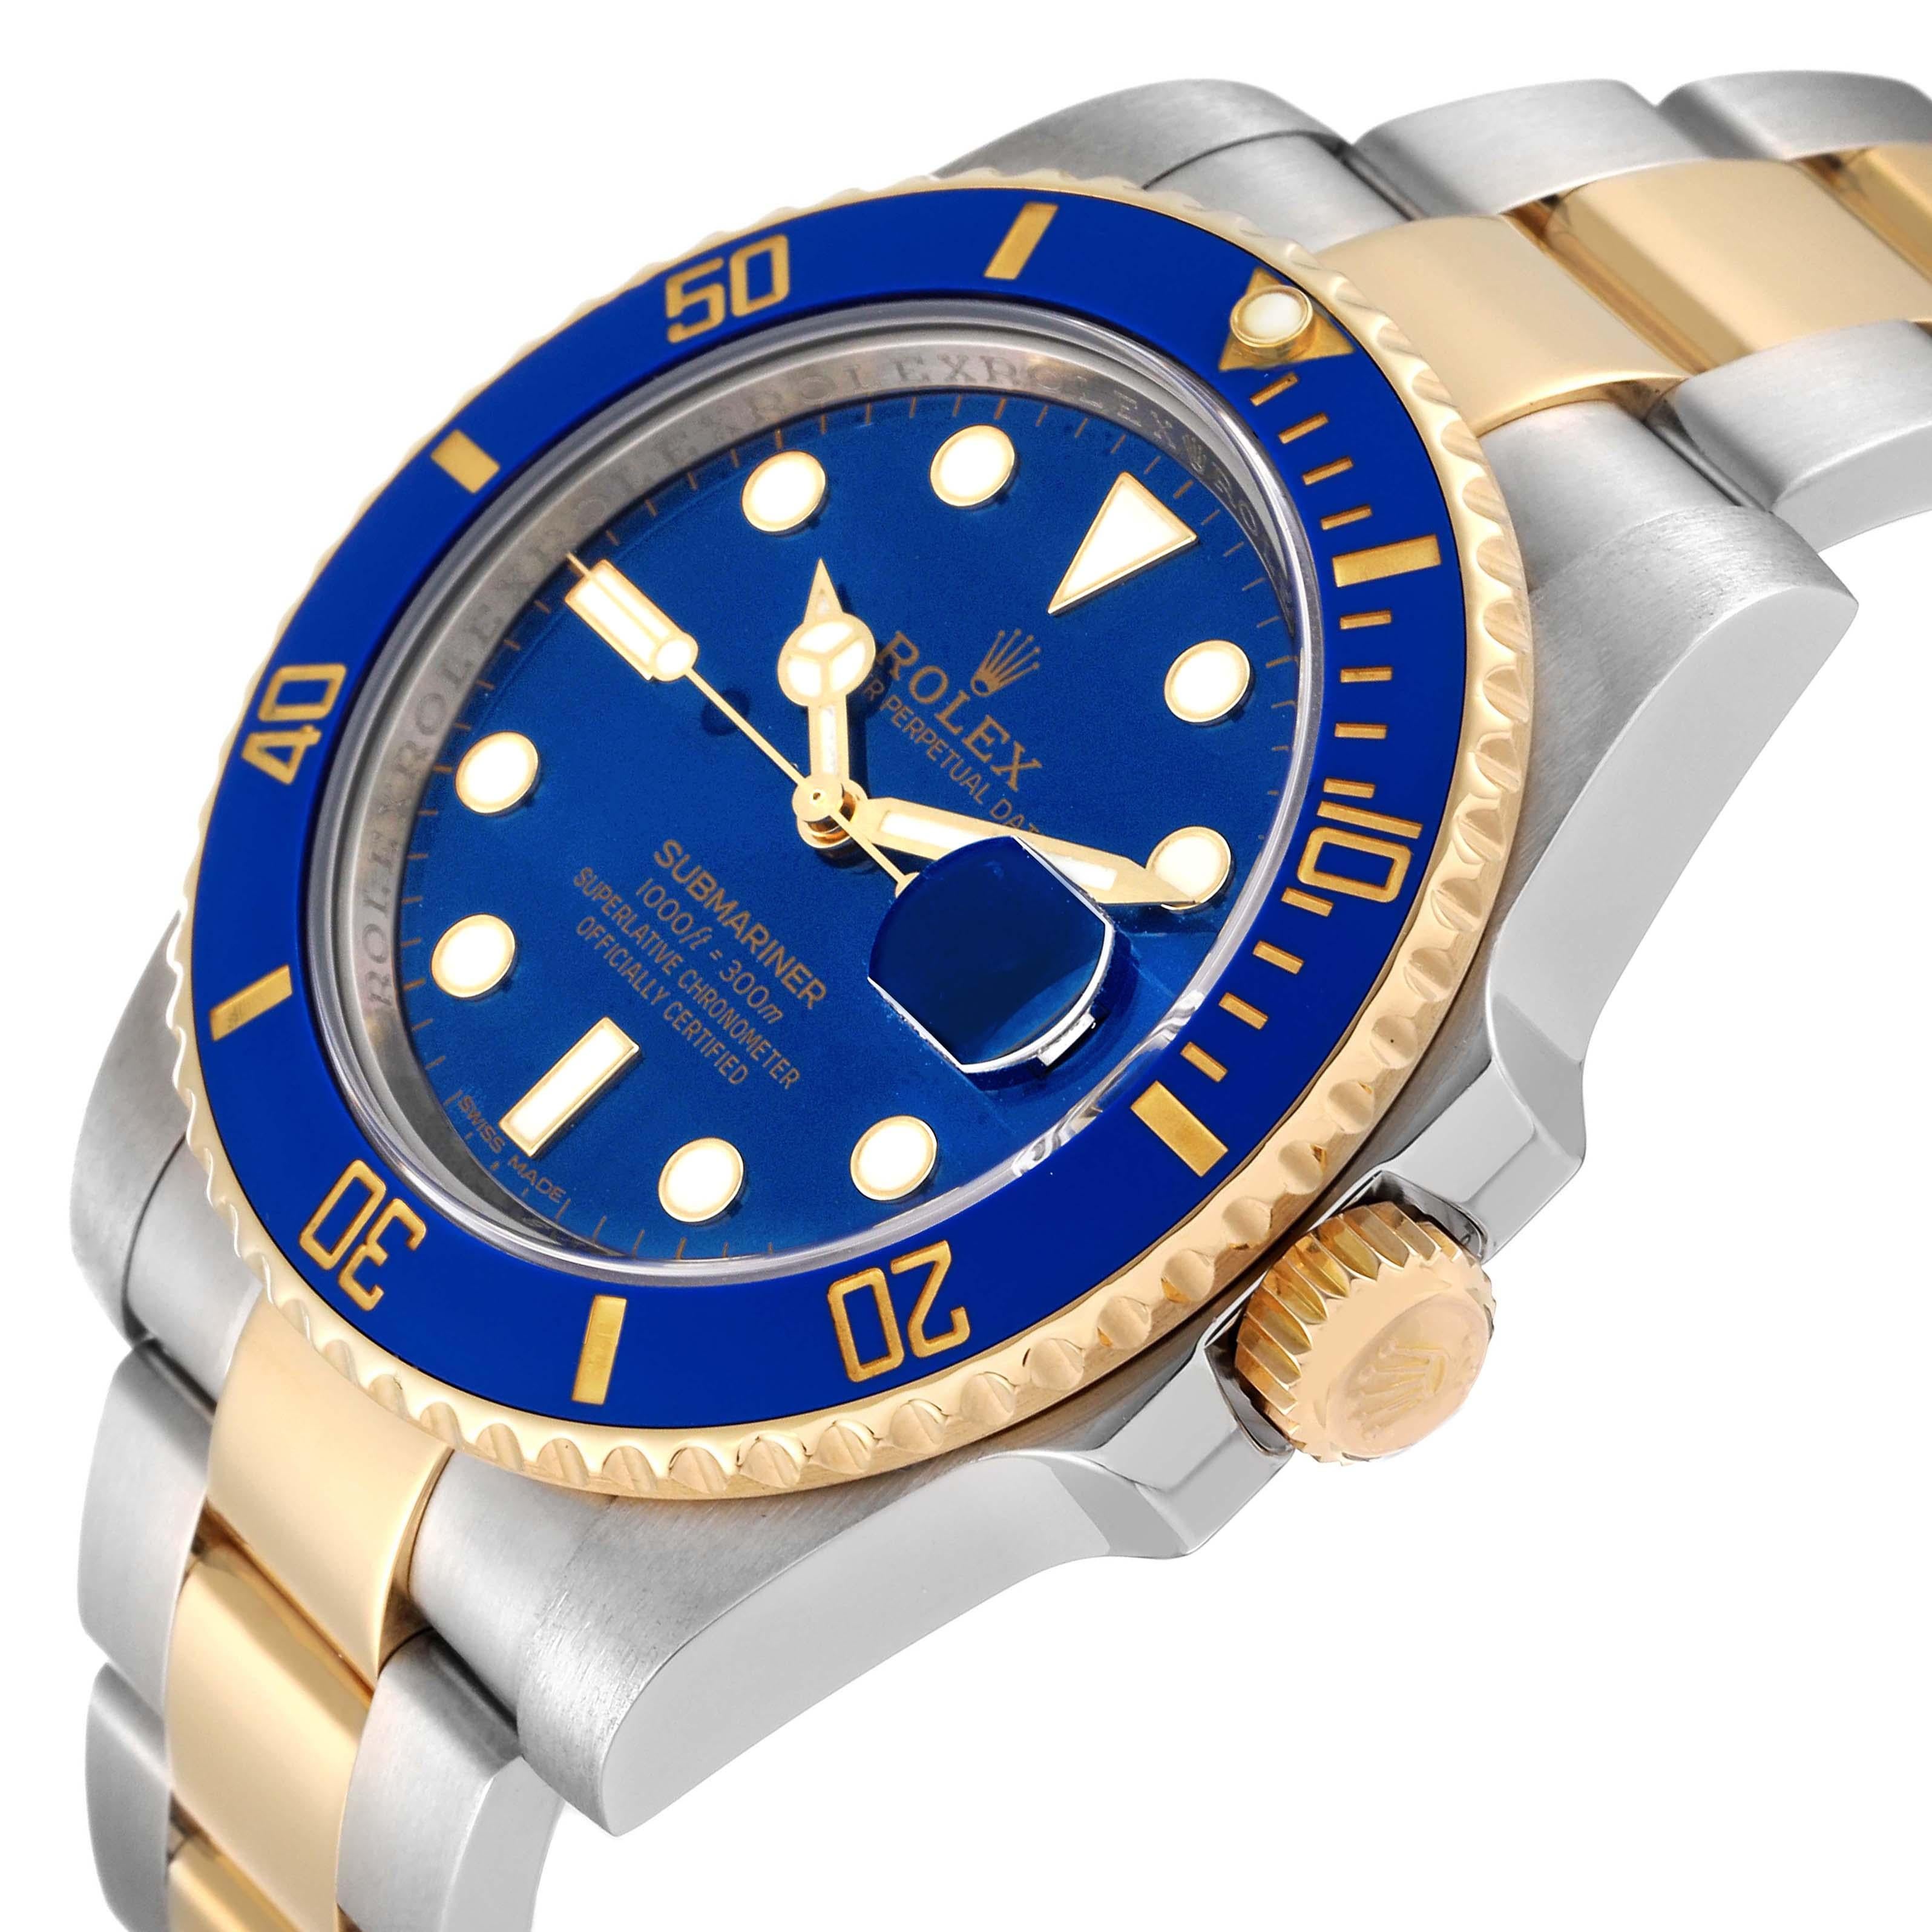 Rolex Submariner Steel Yellow Gold Blue Dial Mens Watch 116613 For Sale 1